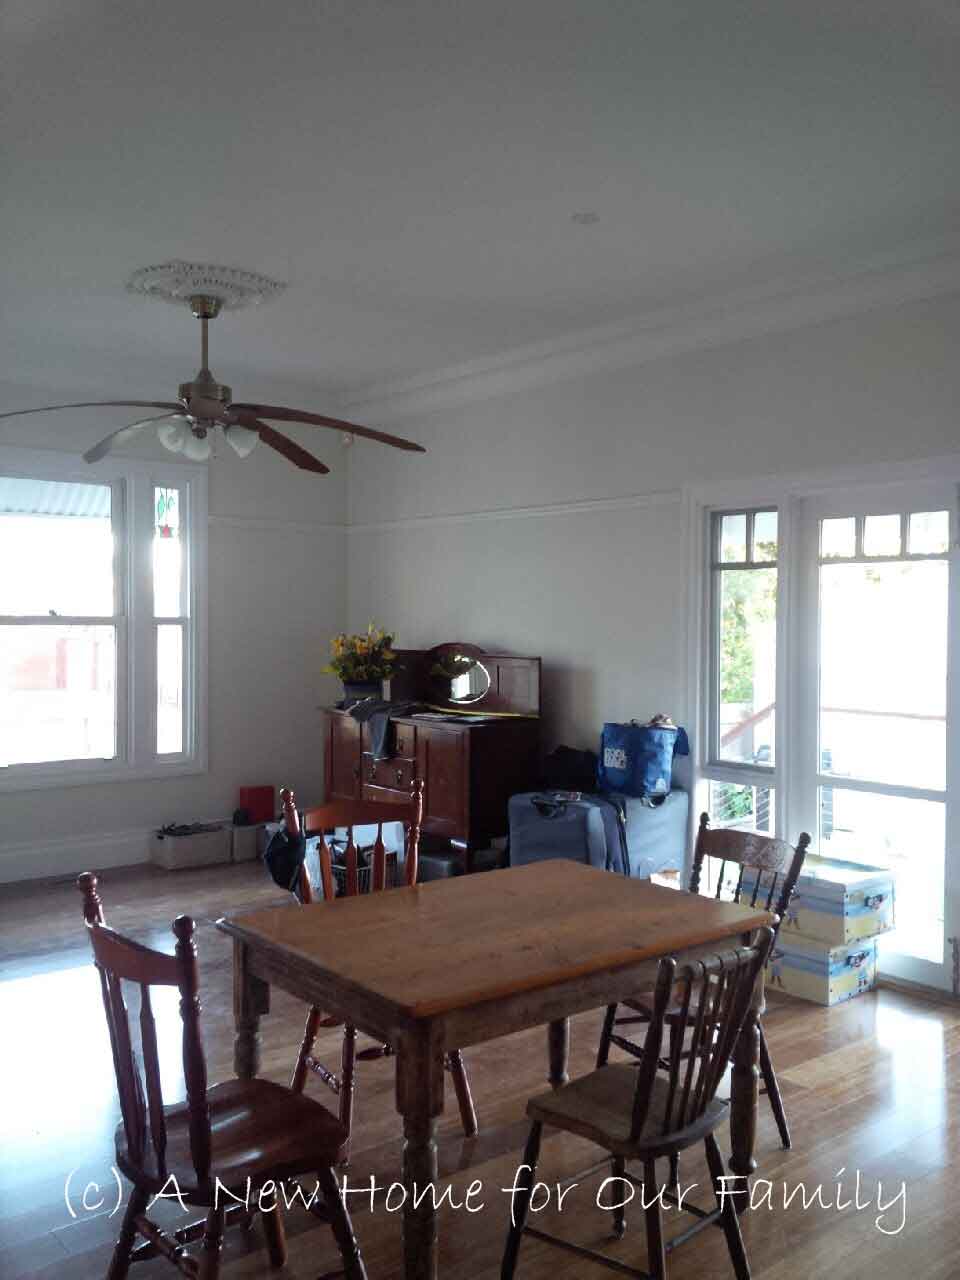 Moving In - Dining Room